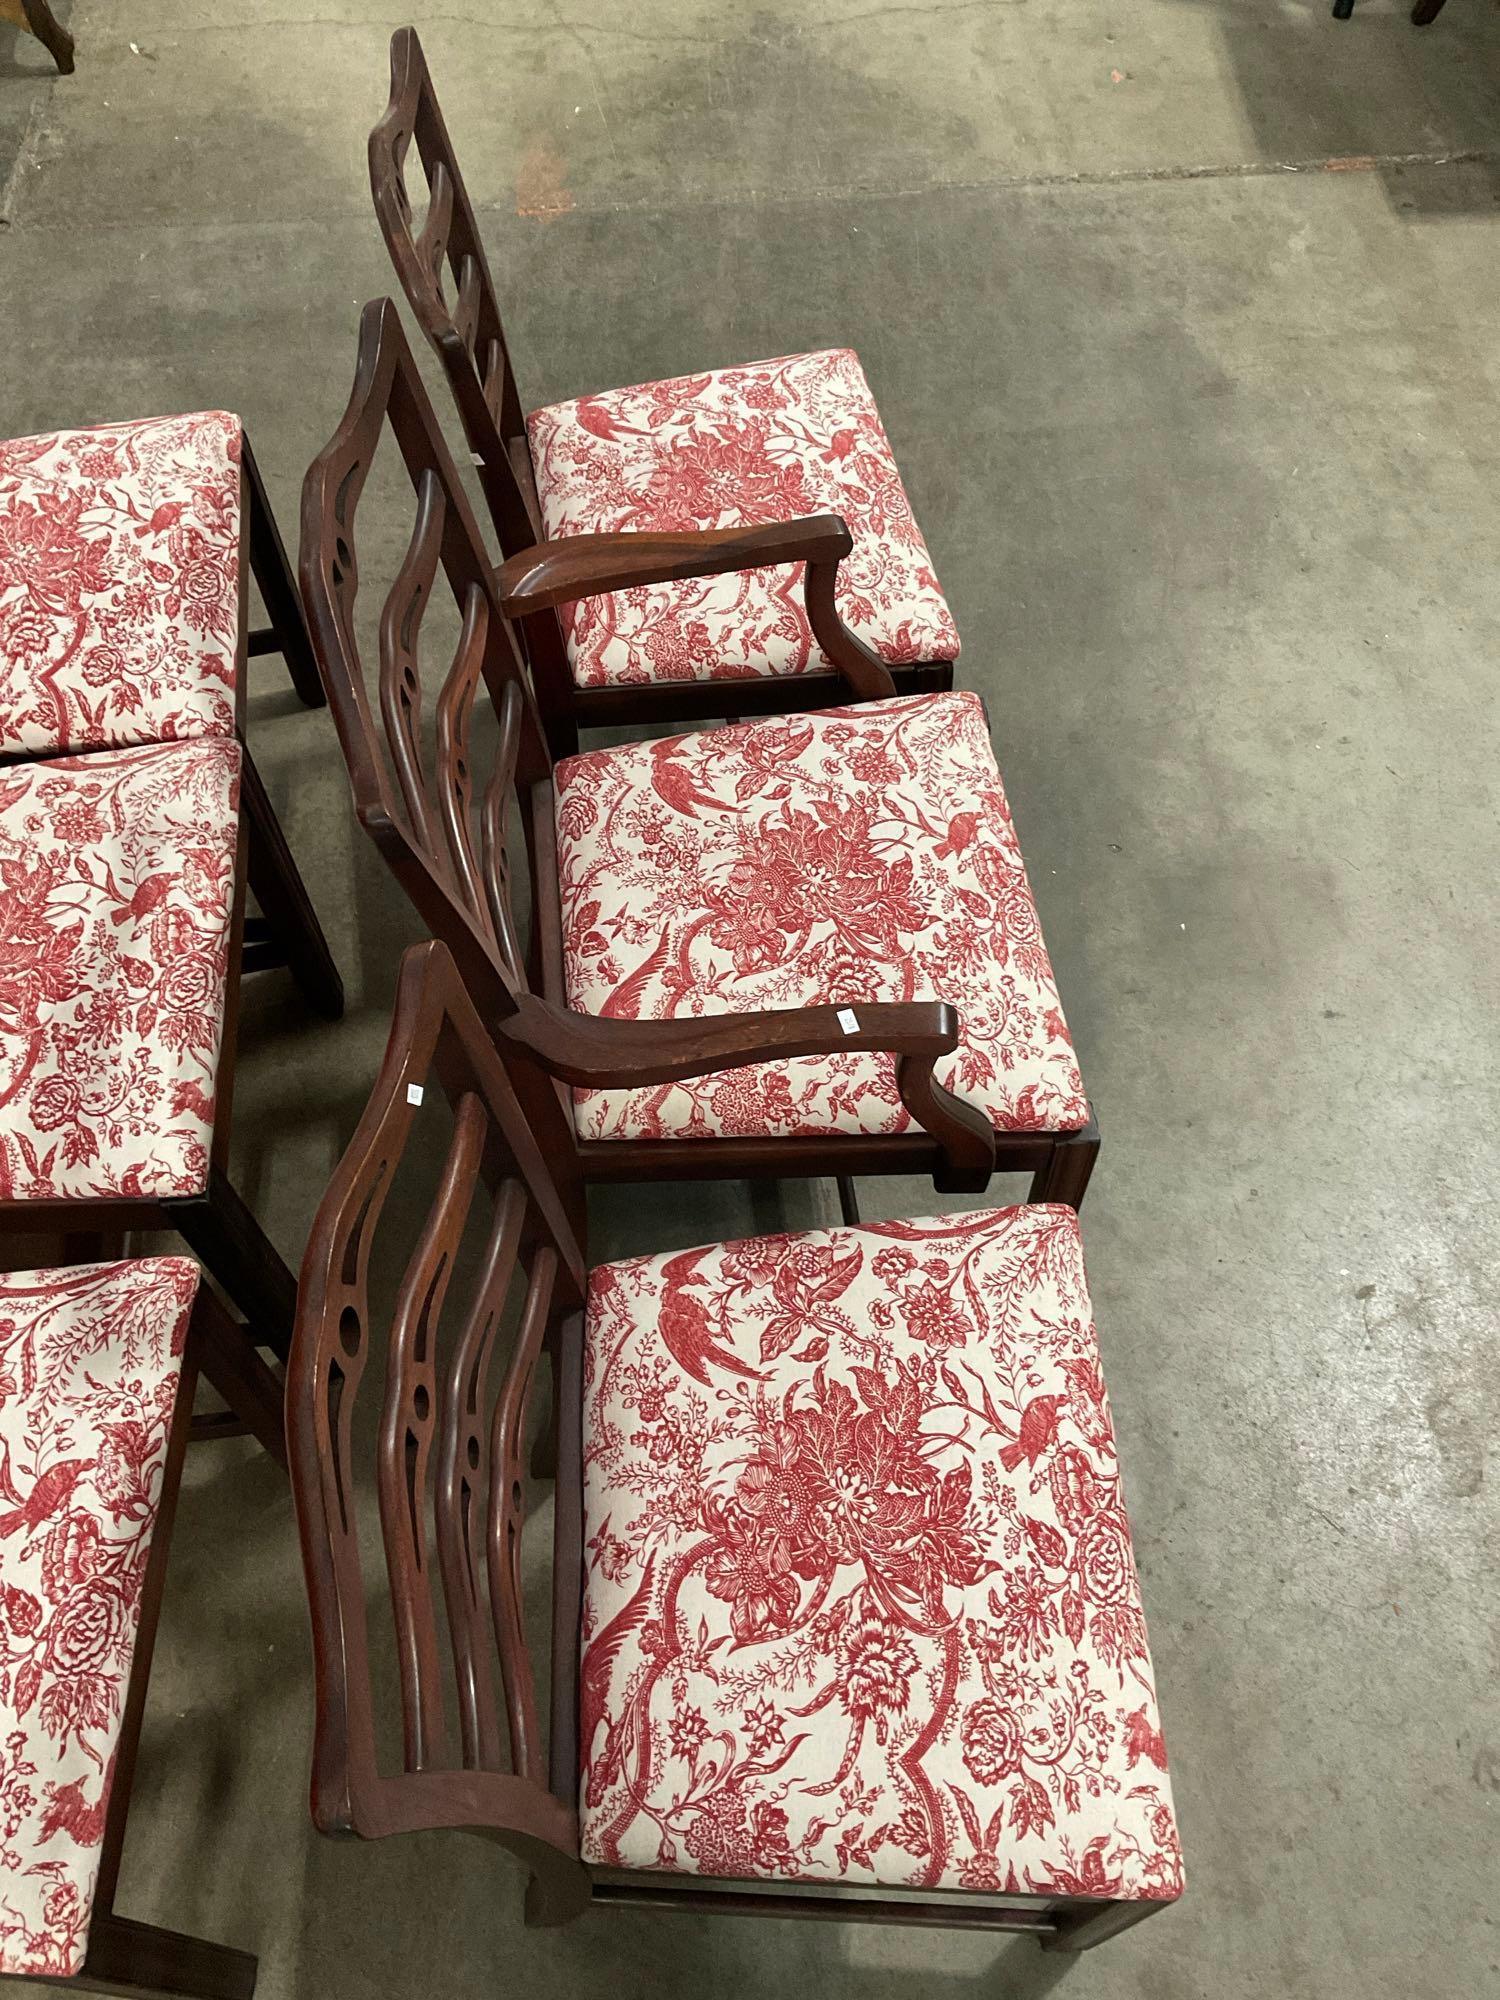 6 pcs Antique Cherry Ladder Back Dining Chairs w/ Red Paisley Upholstery. See pics.